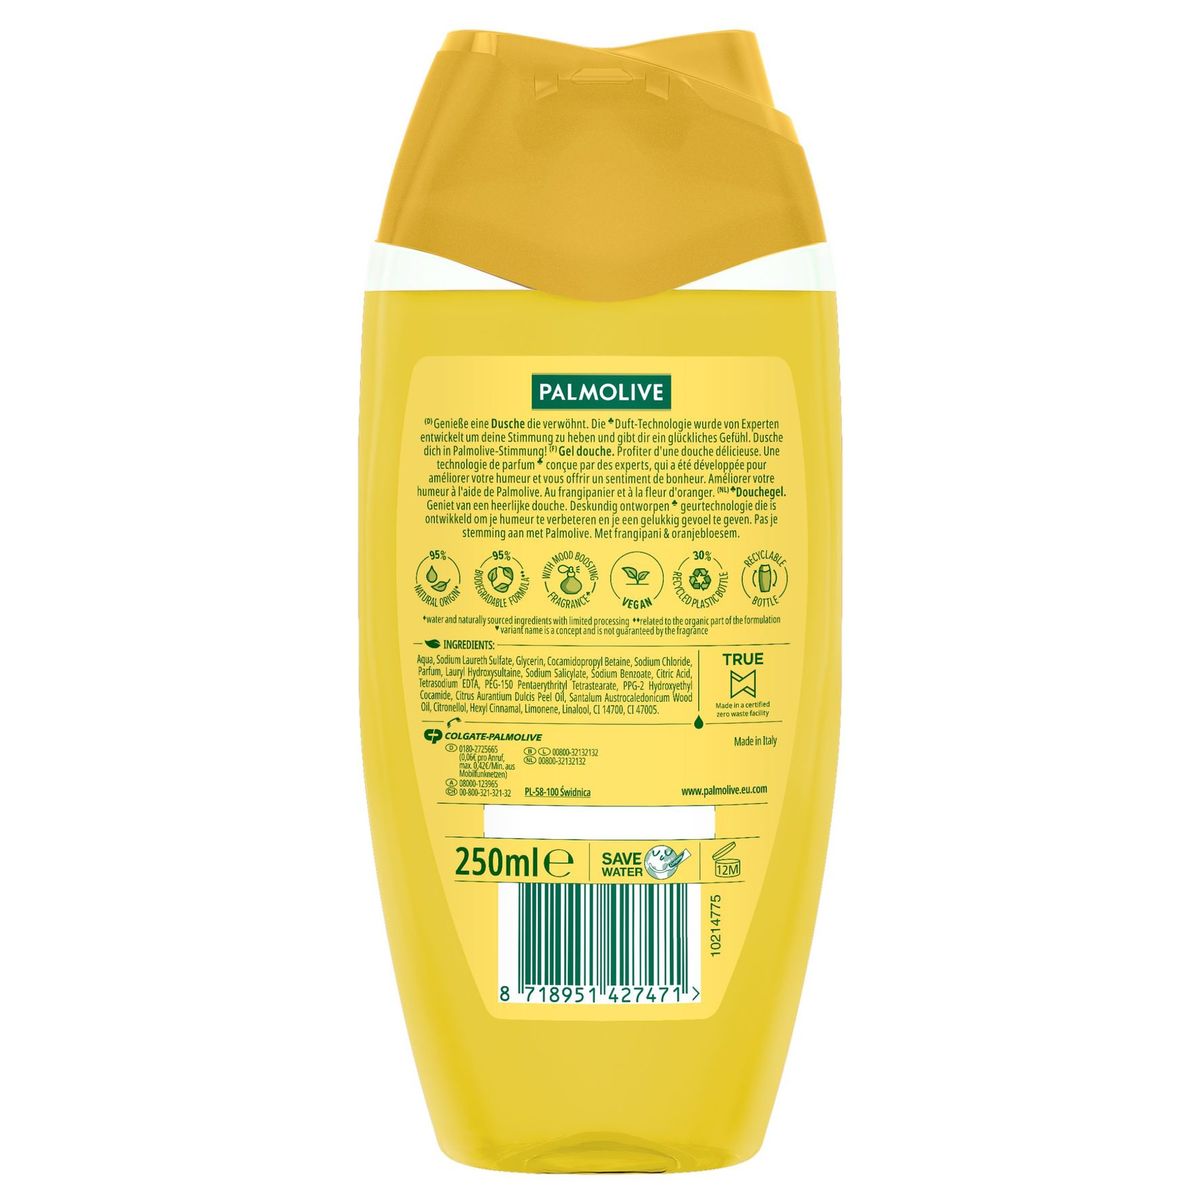 Palmolive Aroma Essence Forever Happy, Gel douche, 250 ml